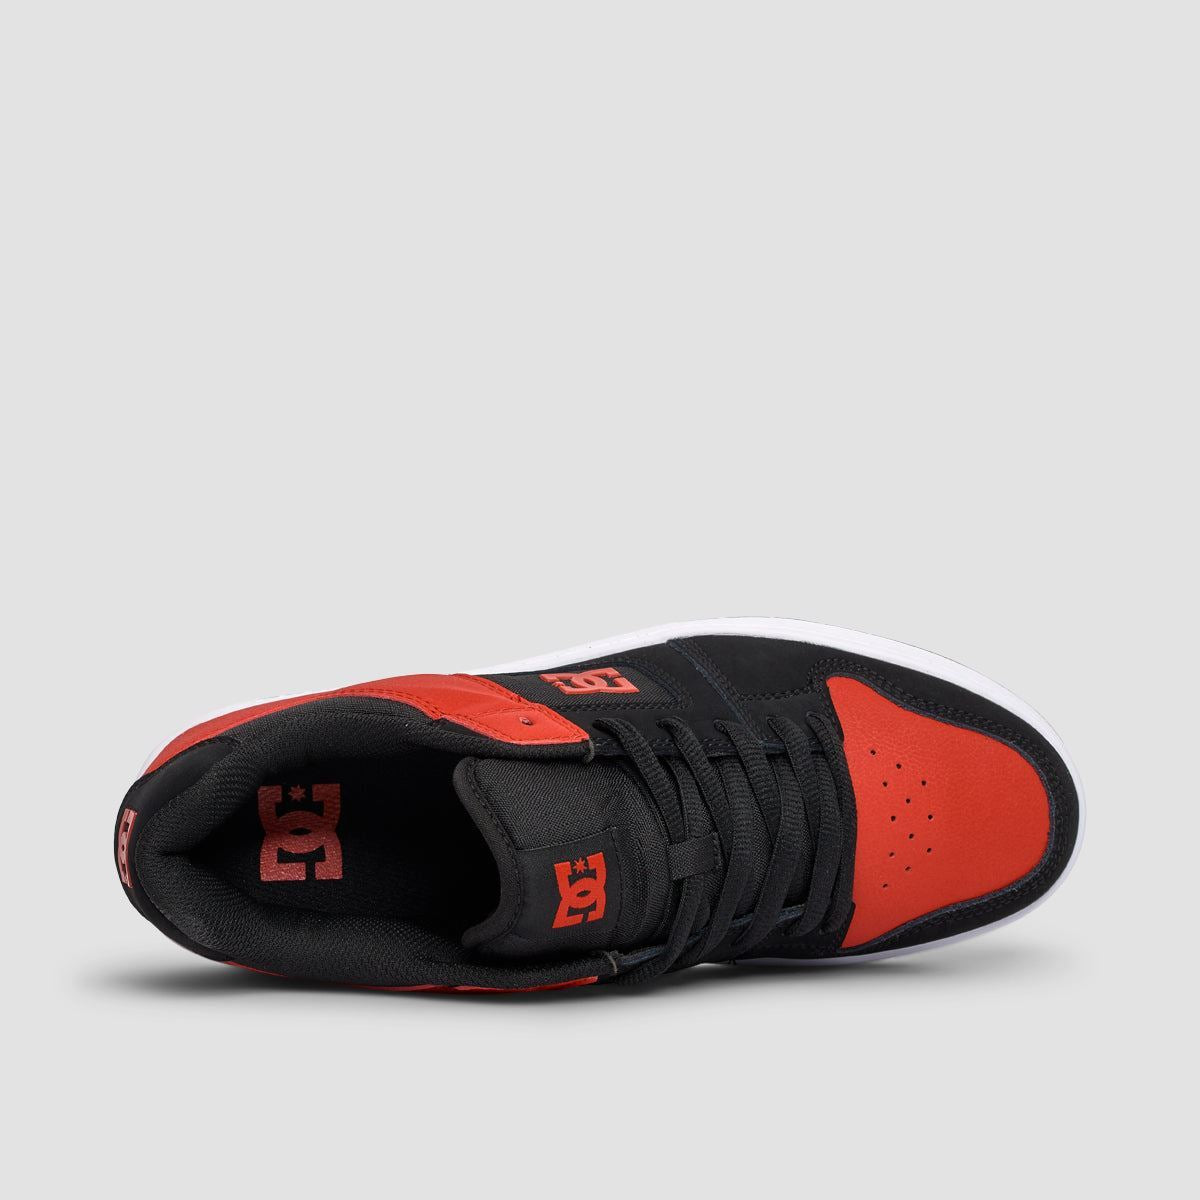 DC Manteca 4 Shoes - Black/Athletic Red